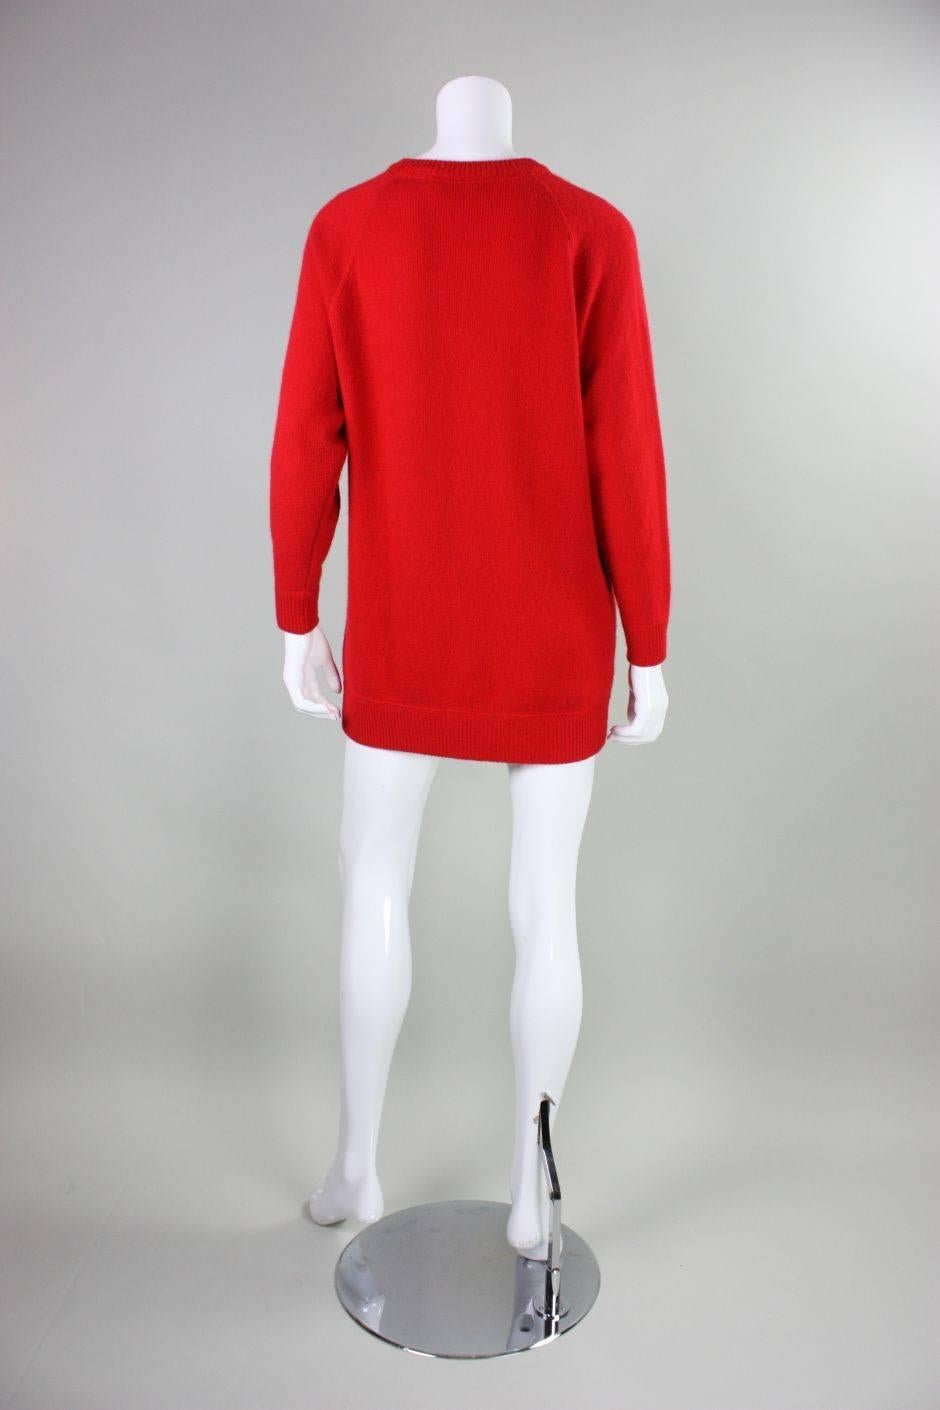 Red Vintage William Kasper Humorous Cashmere Sweater For Sale